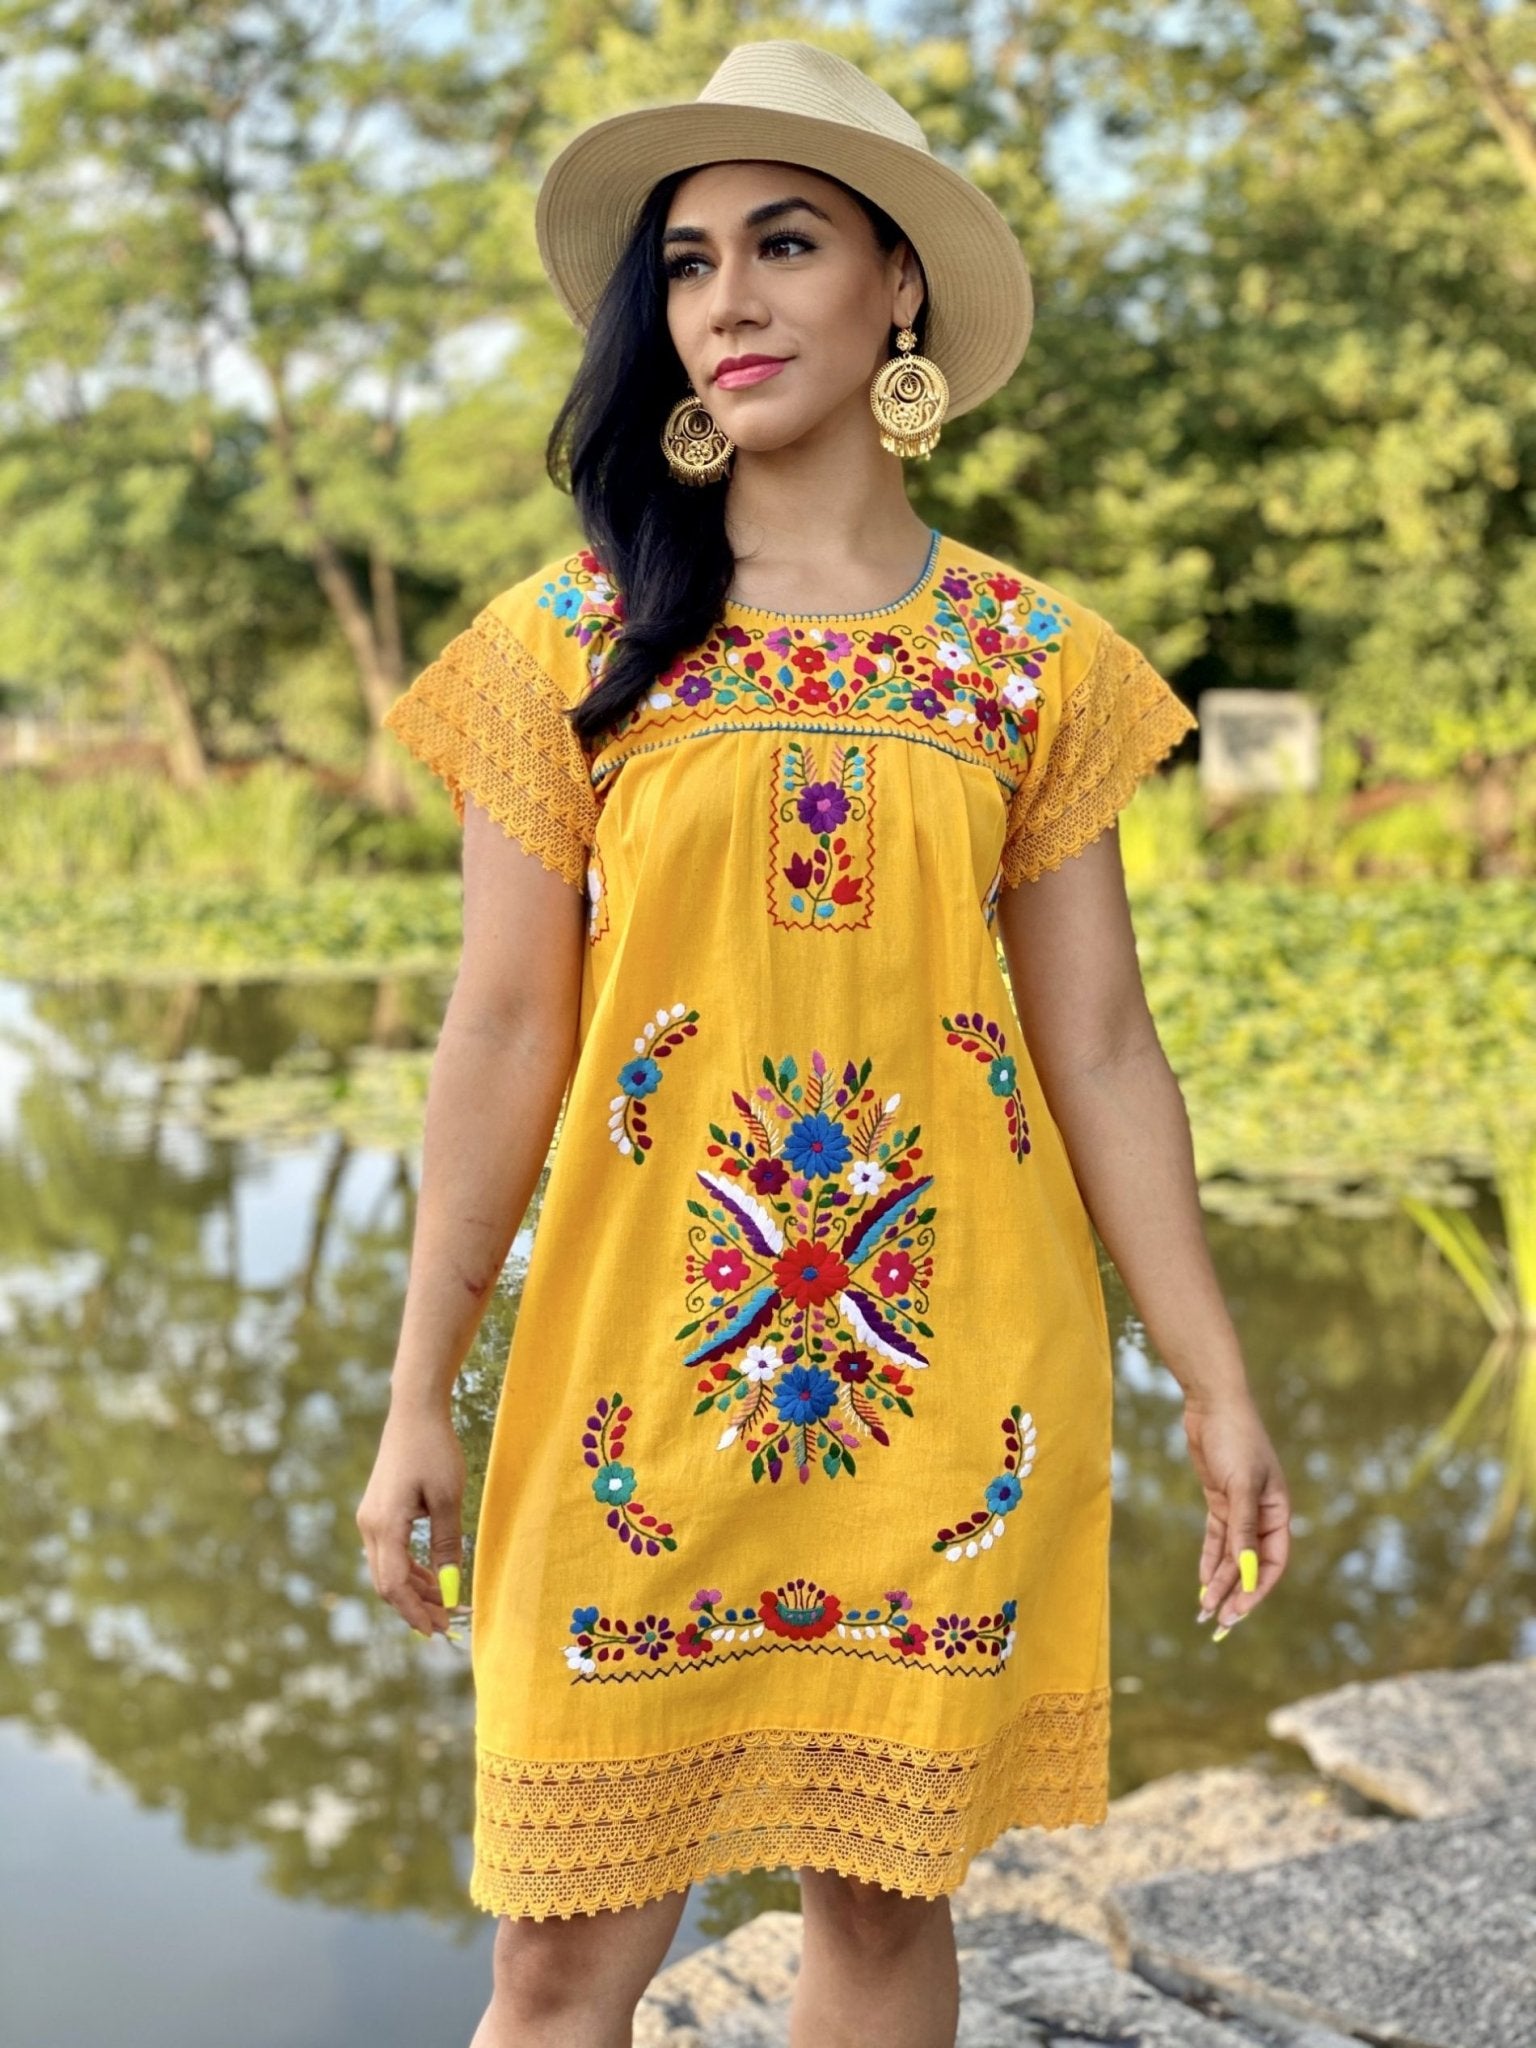 Colorful floral mexican dress. Floral Embroidered Mexican Dress with beautiful lace details on the sleeve and lower part of the skirt. - Solei Store